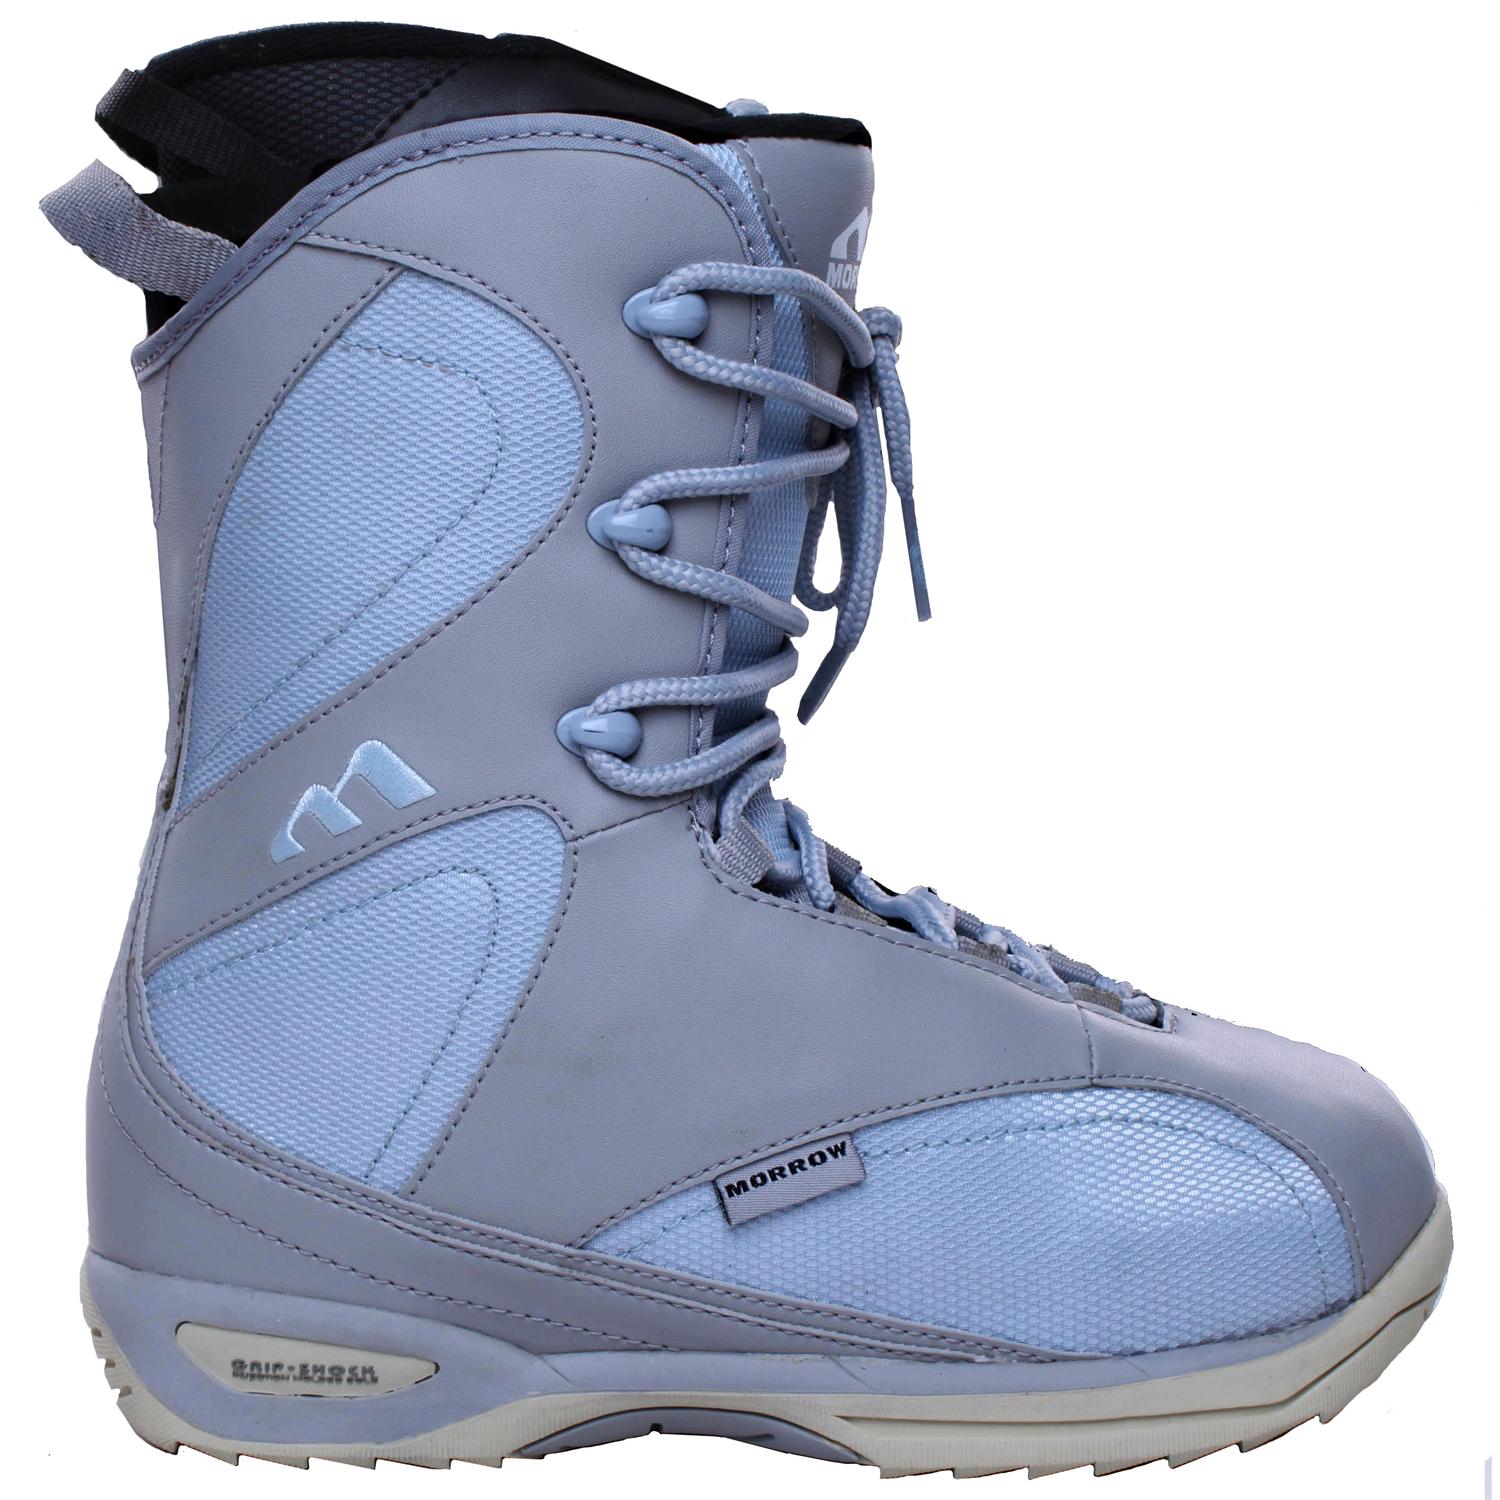 Morrow Lotus Snowboard Boots - Women's 2005 | evo outlet